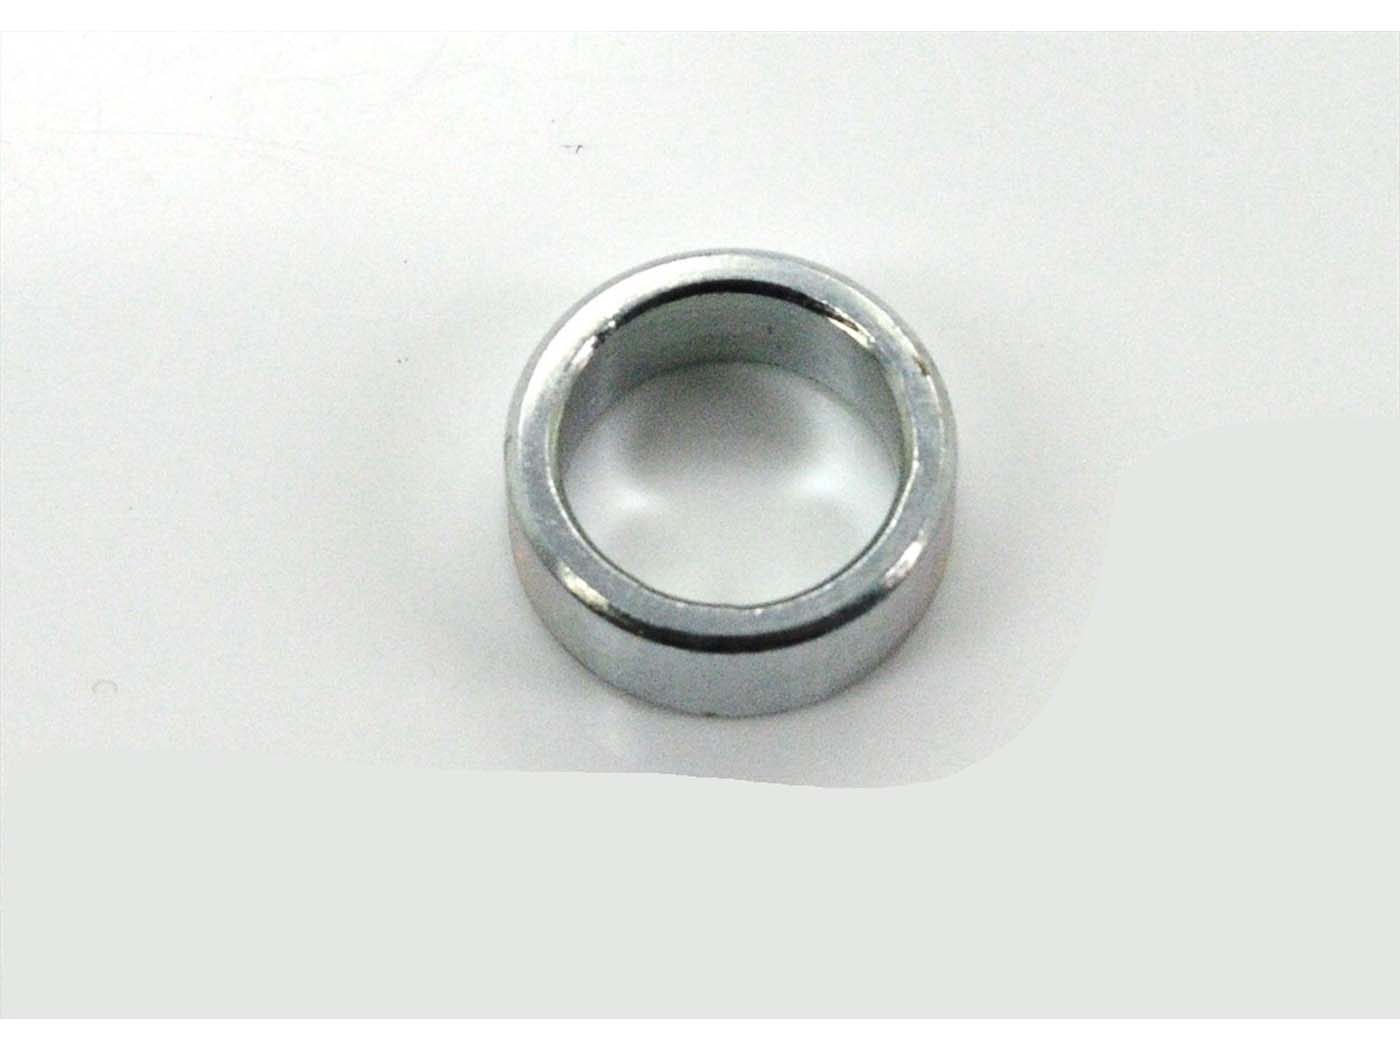 Spacer Bushing Rear Wheel Dimensions 12 X 6mm For Zündapp Automatic Moped Type 442